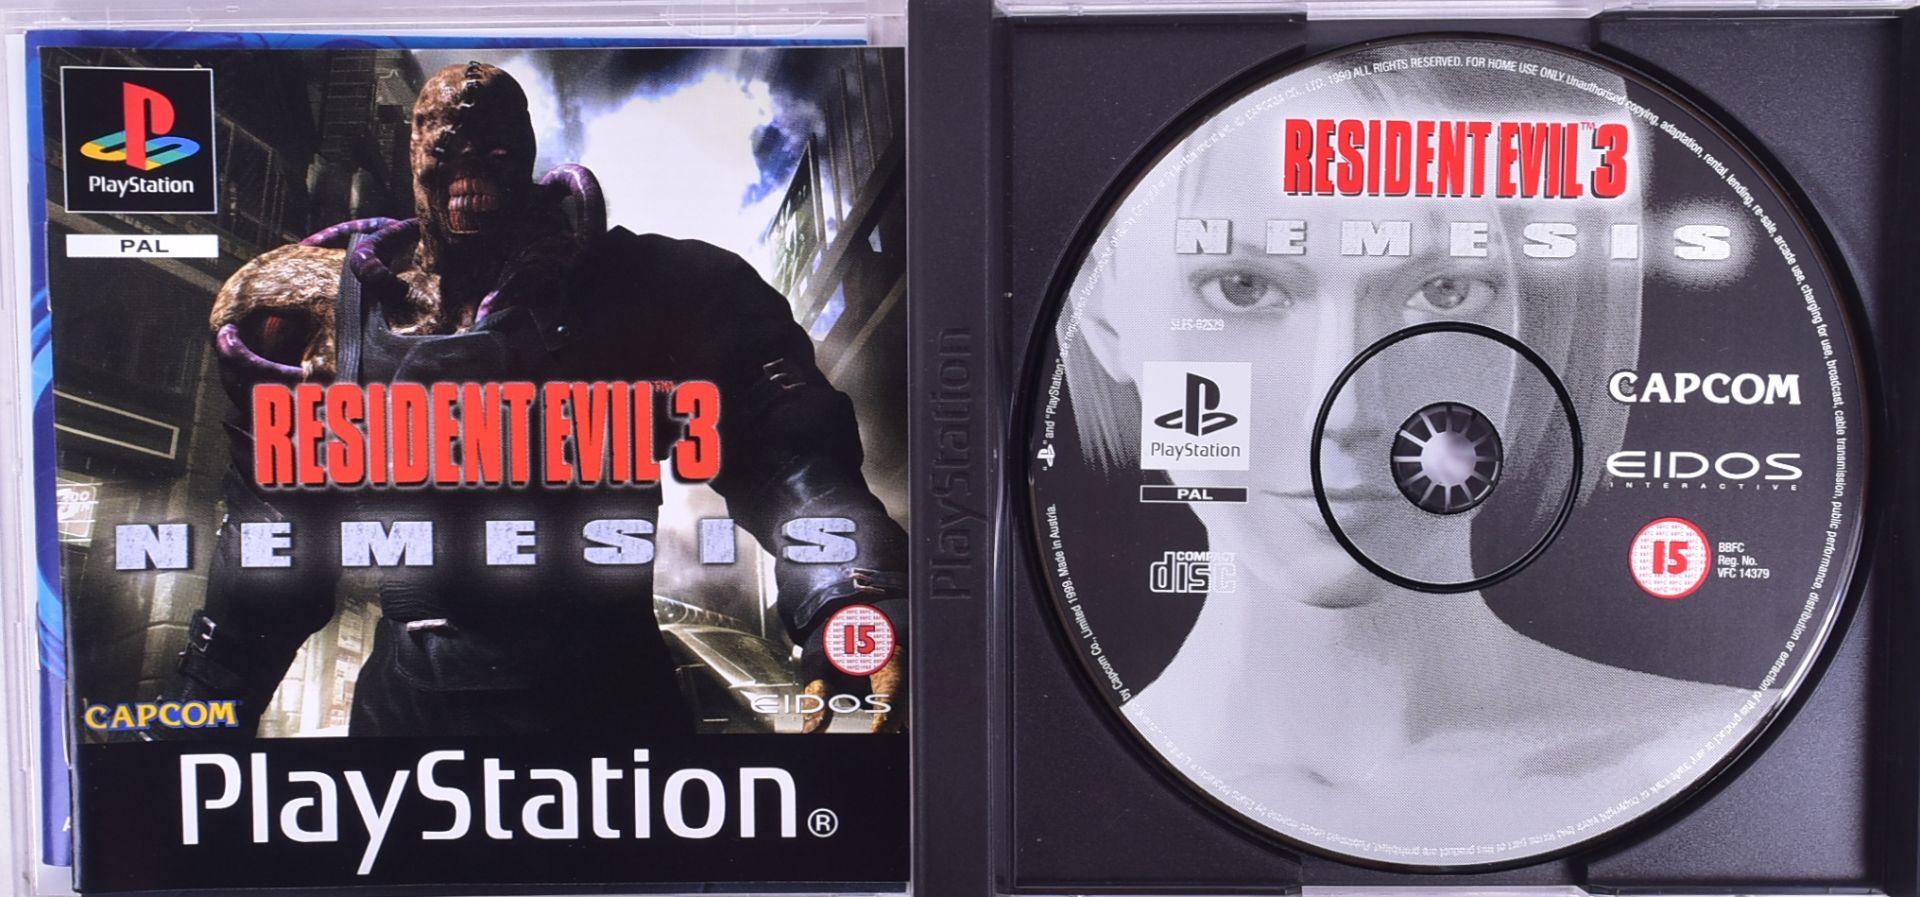 RETRO GAMING - PLAYSTATION ONE - RESIDENT EVIL 1 2 & 3 - Image 4 of 4